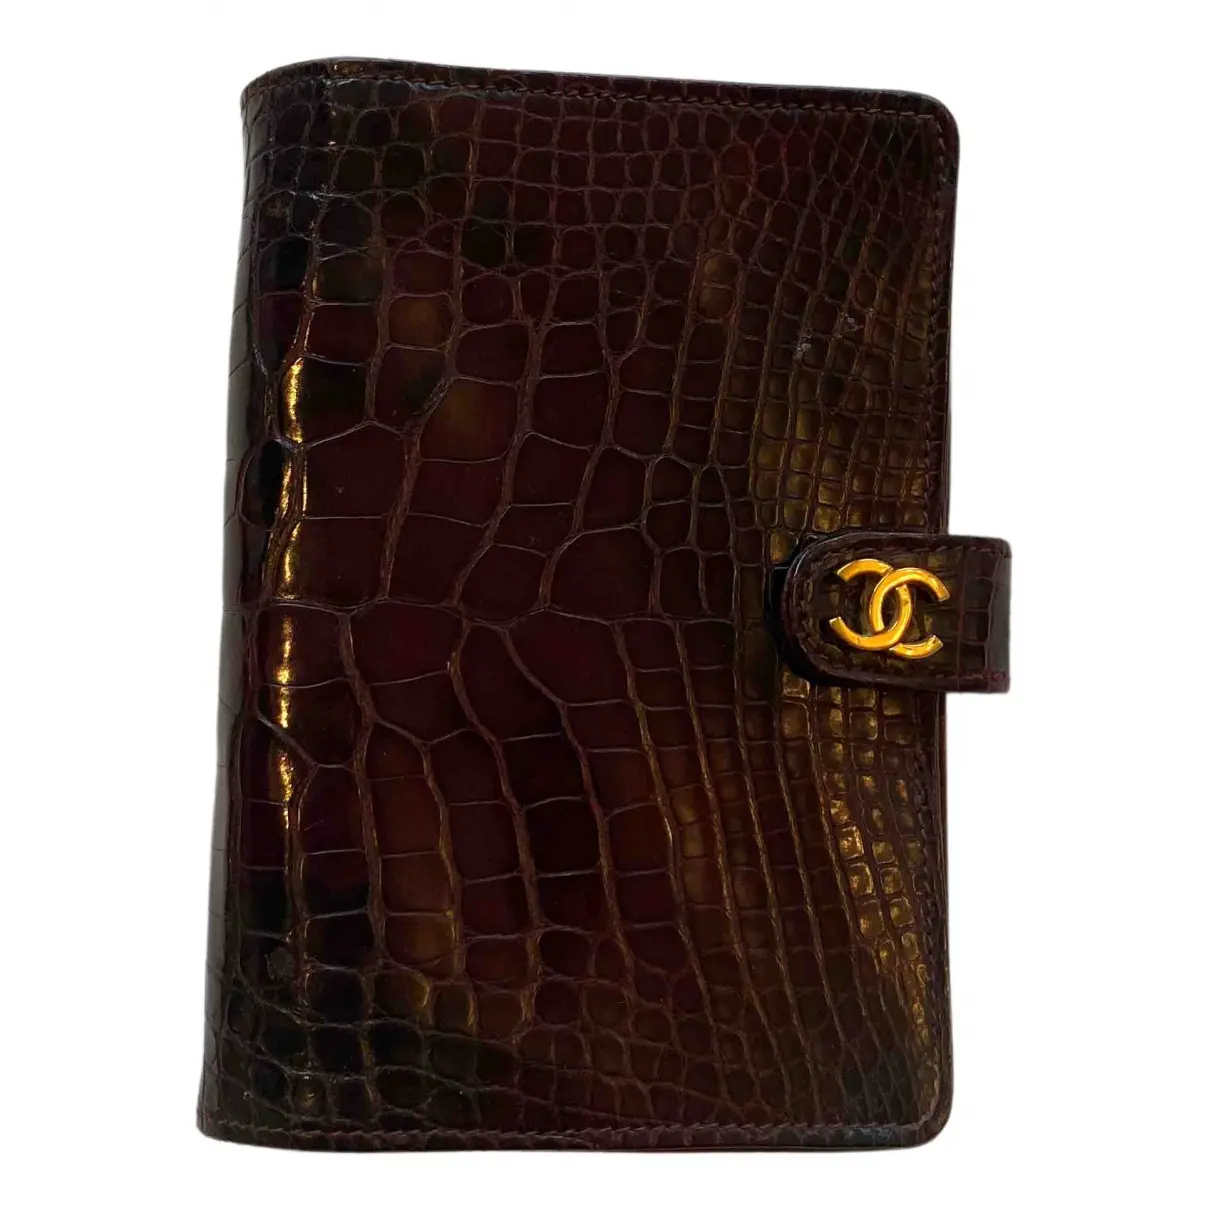 Exotic leathers home decor Chanel - Vintage